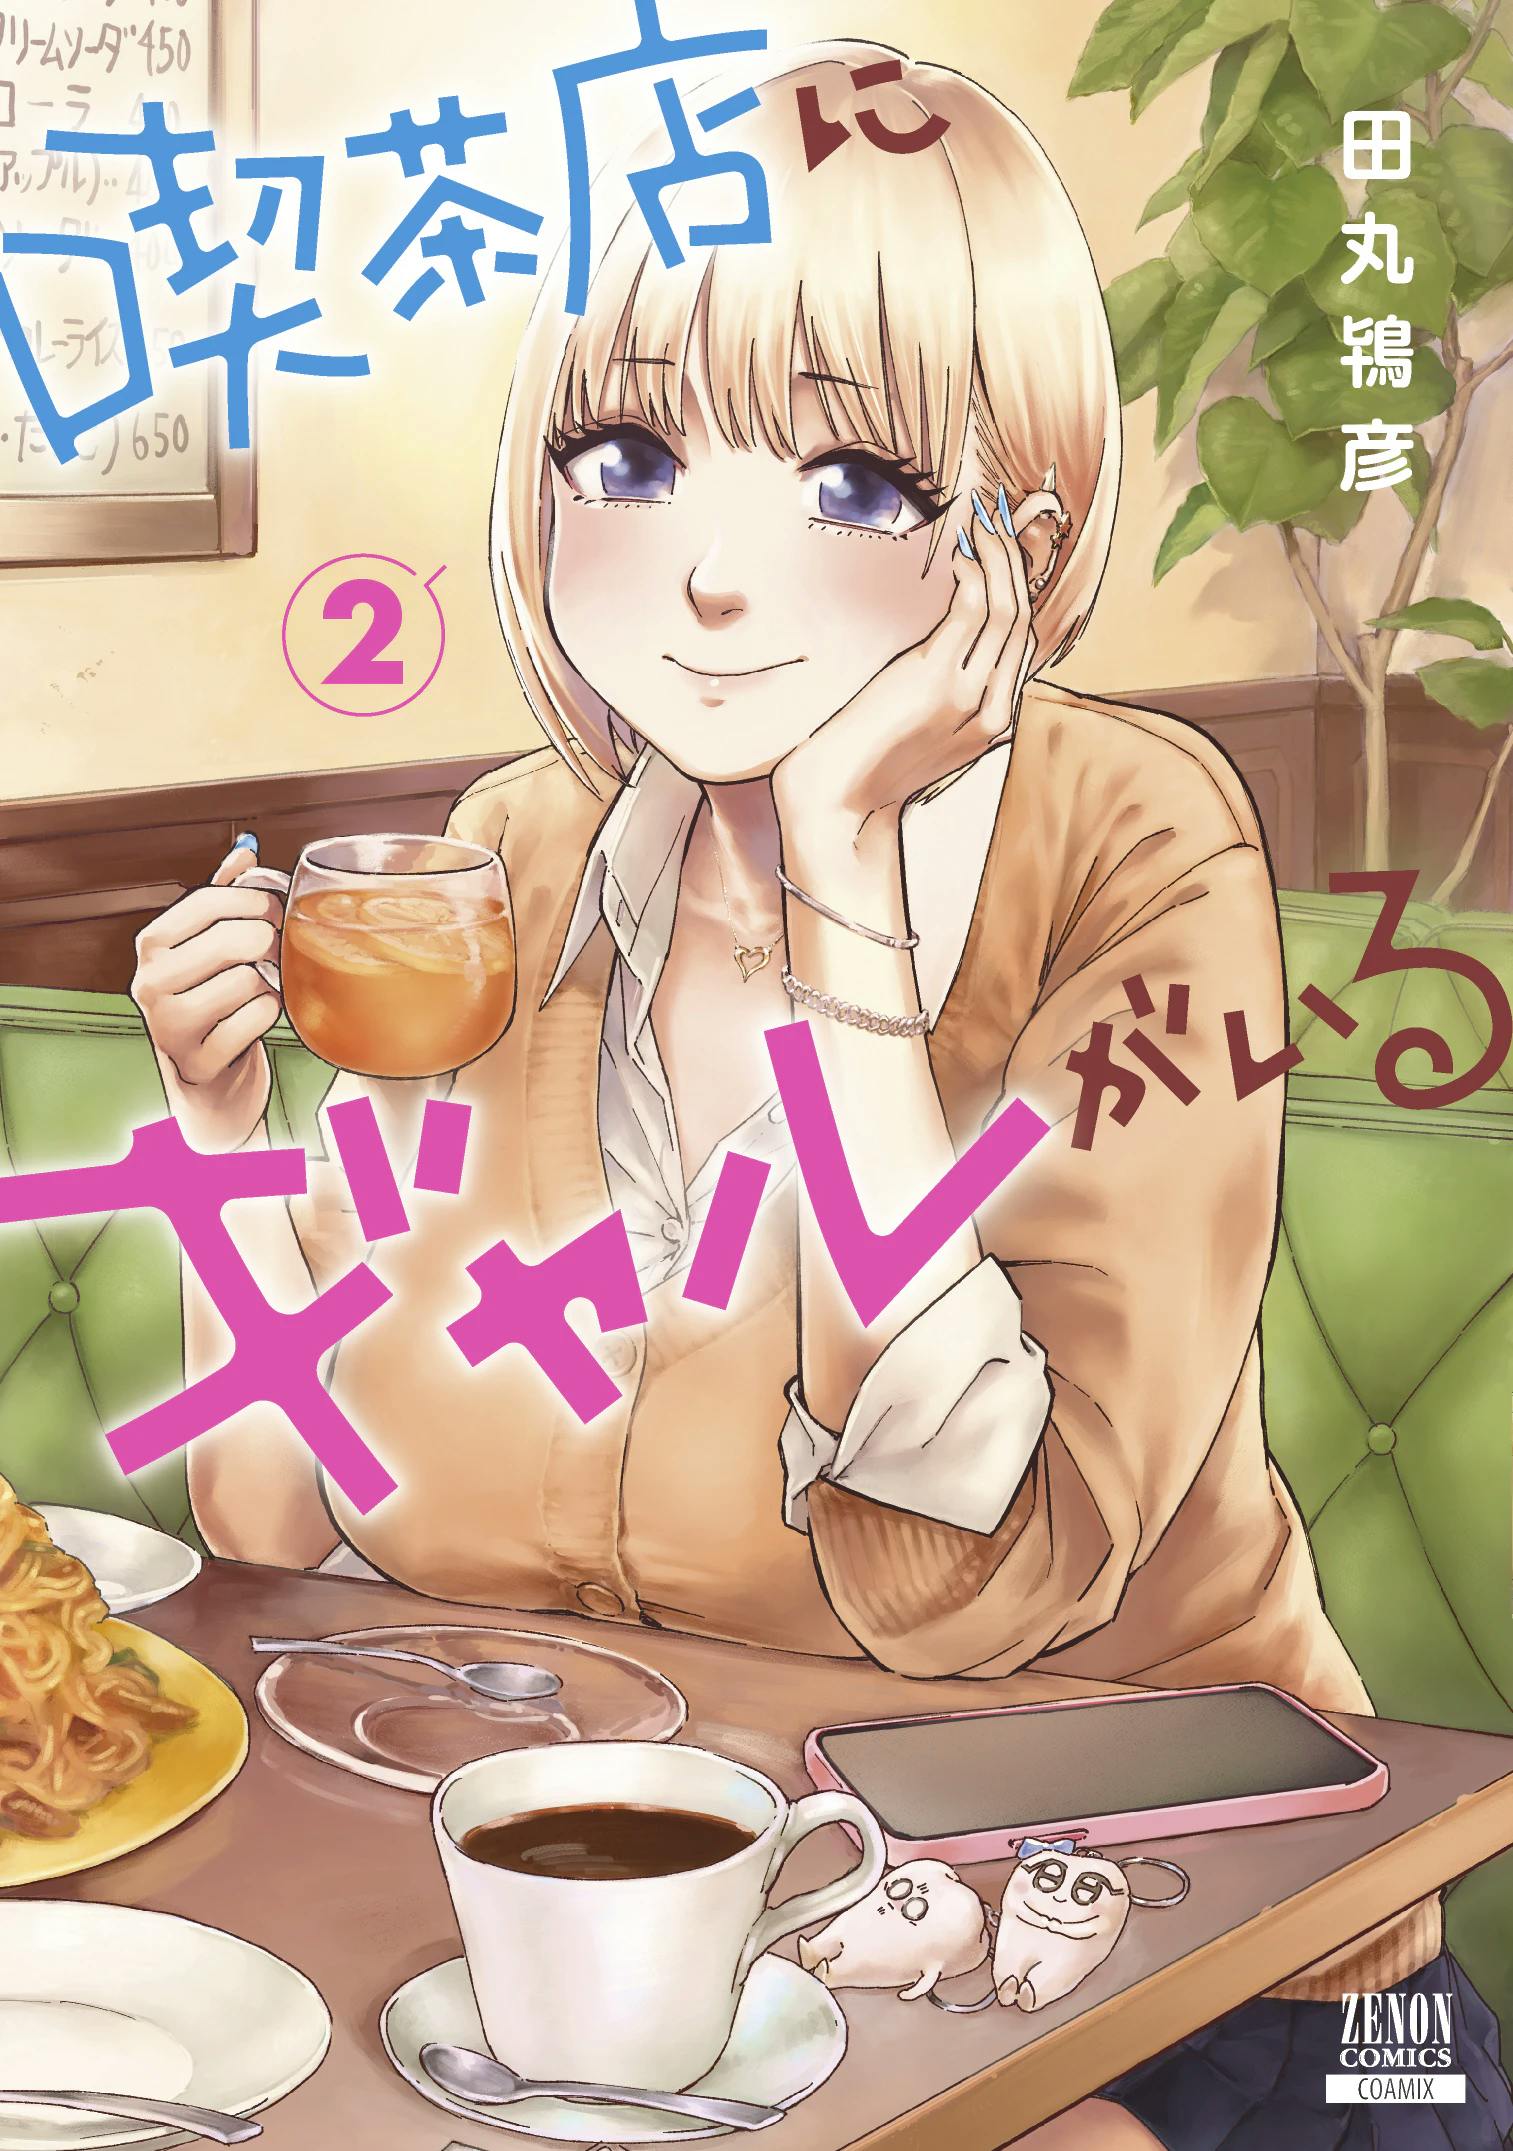 Enrich your life with gals! “There’s a Gal in the Coffee Shop” Volume 2 will be released on February 20th!